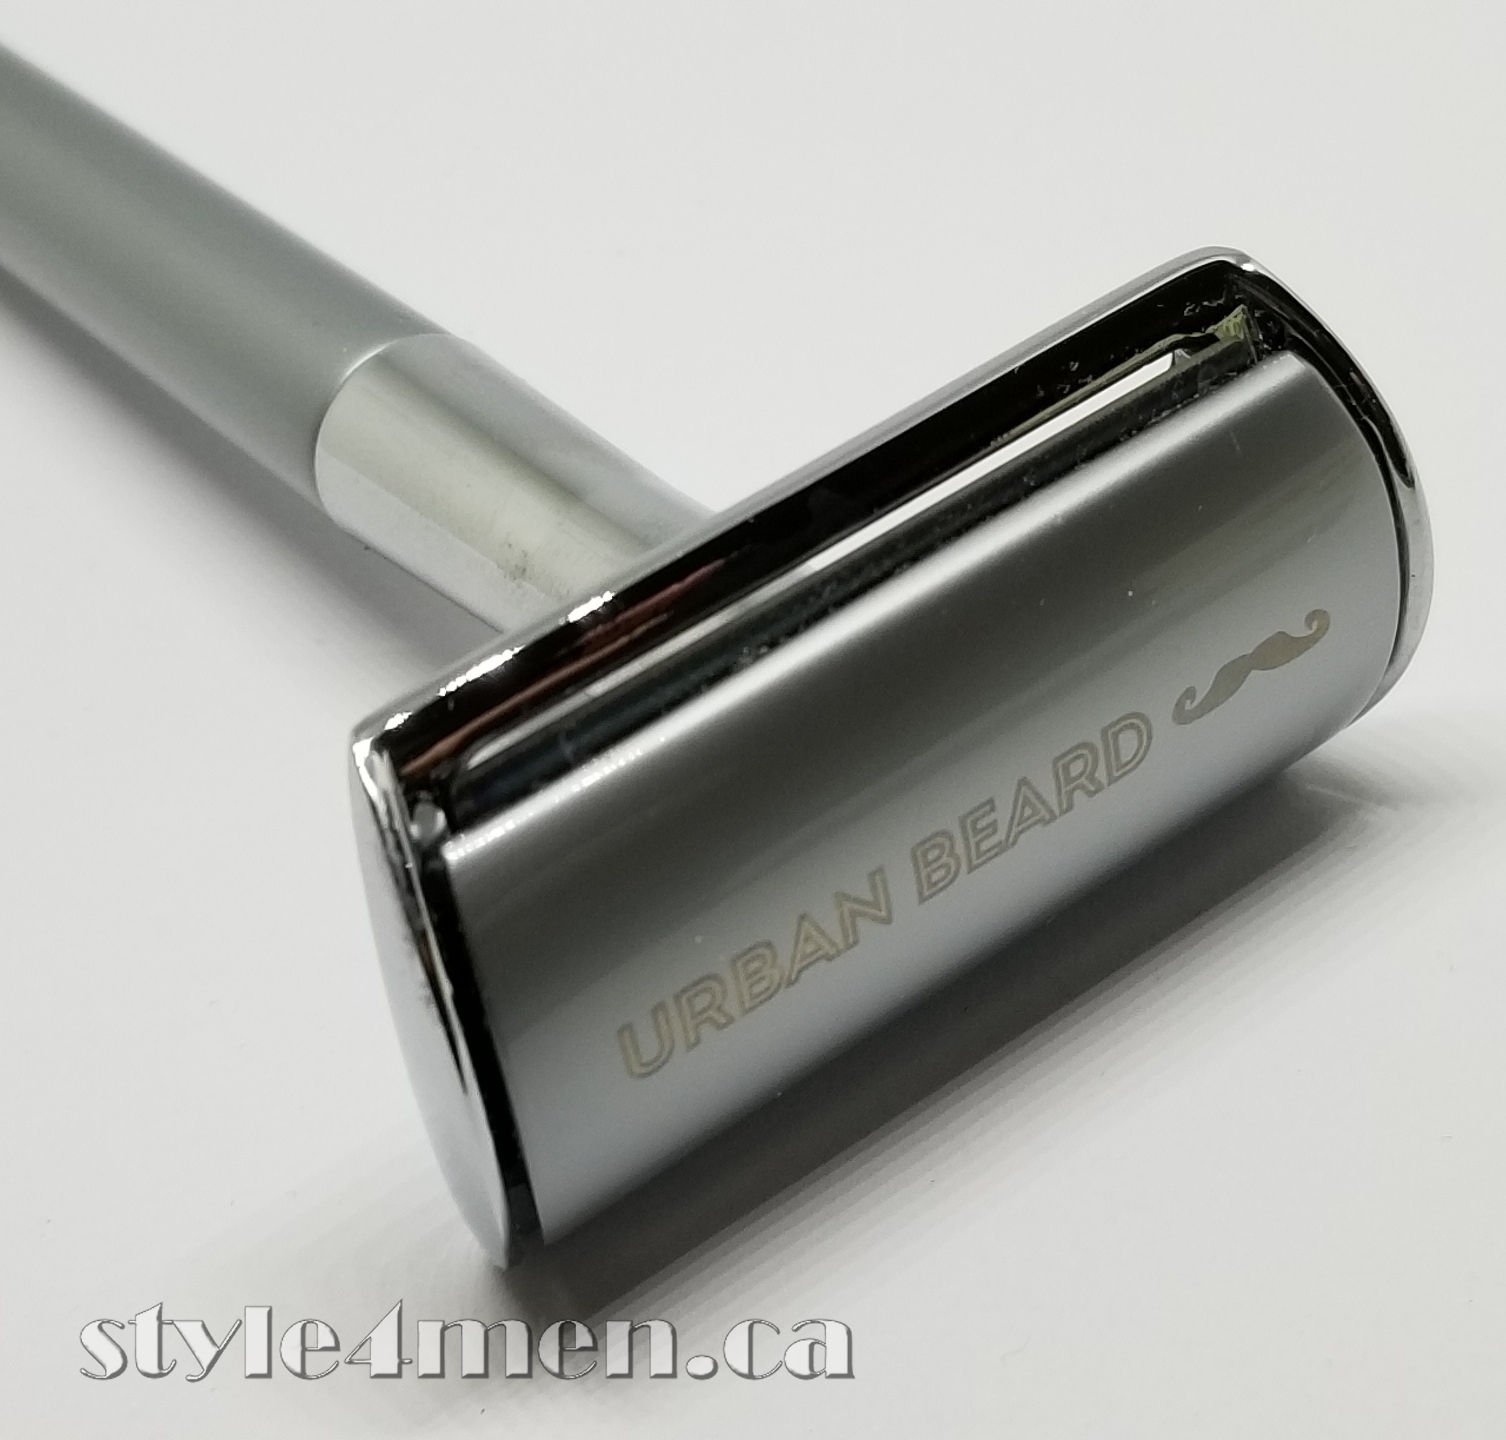 Urban Beard Safety Razor – Not for the daily wet shaver